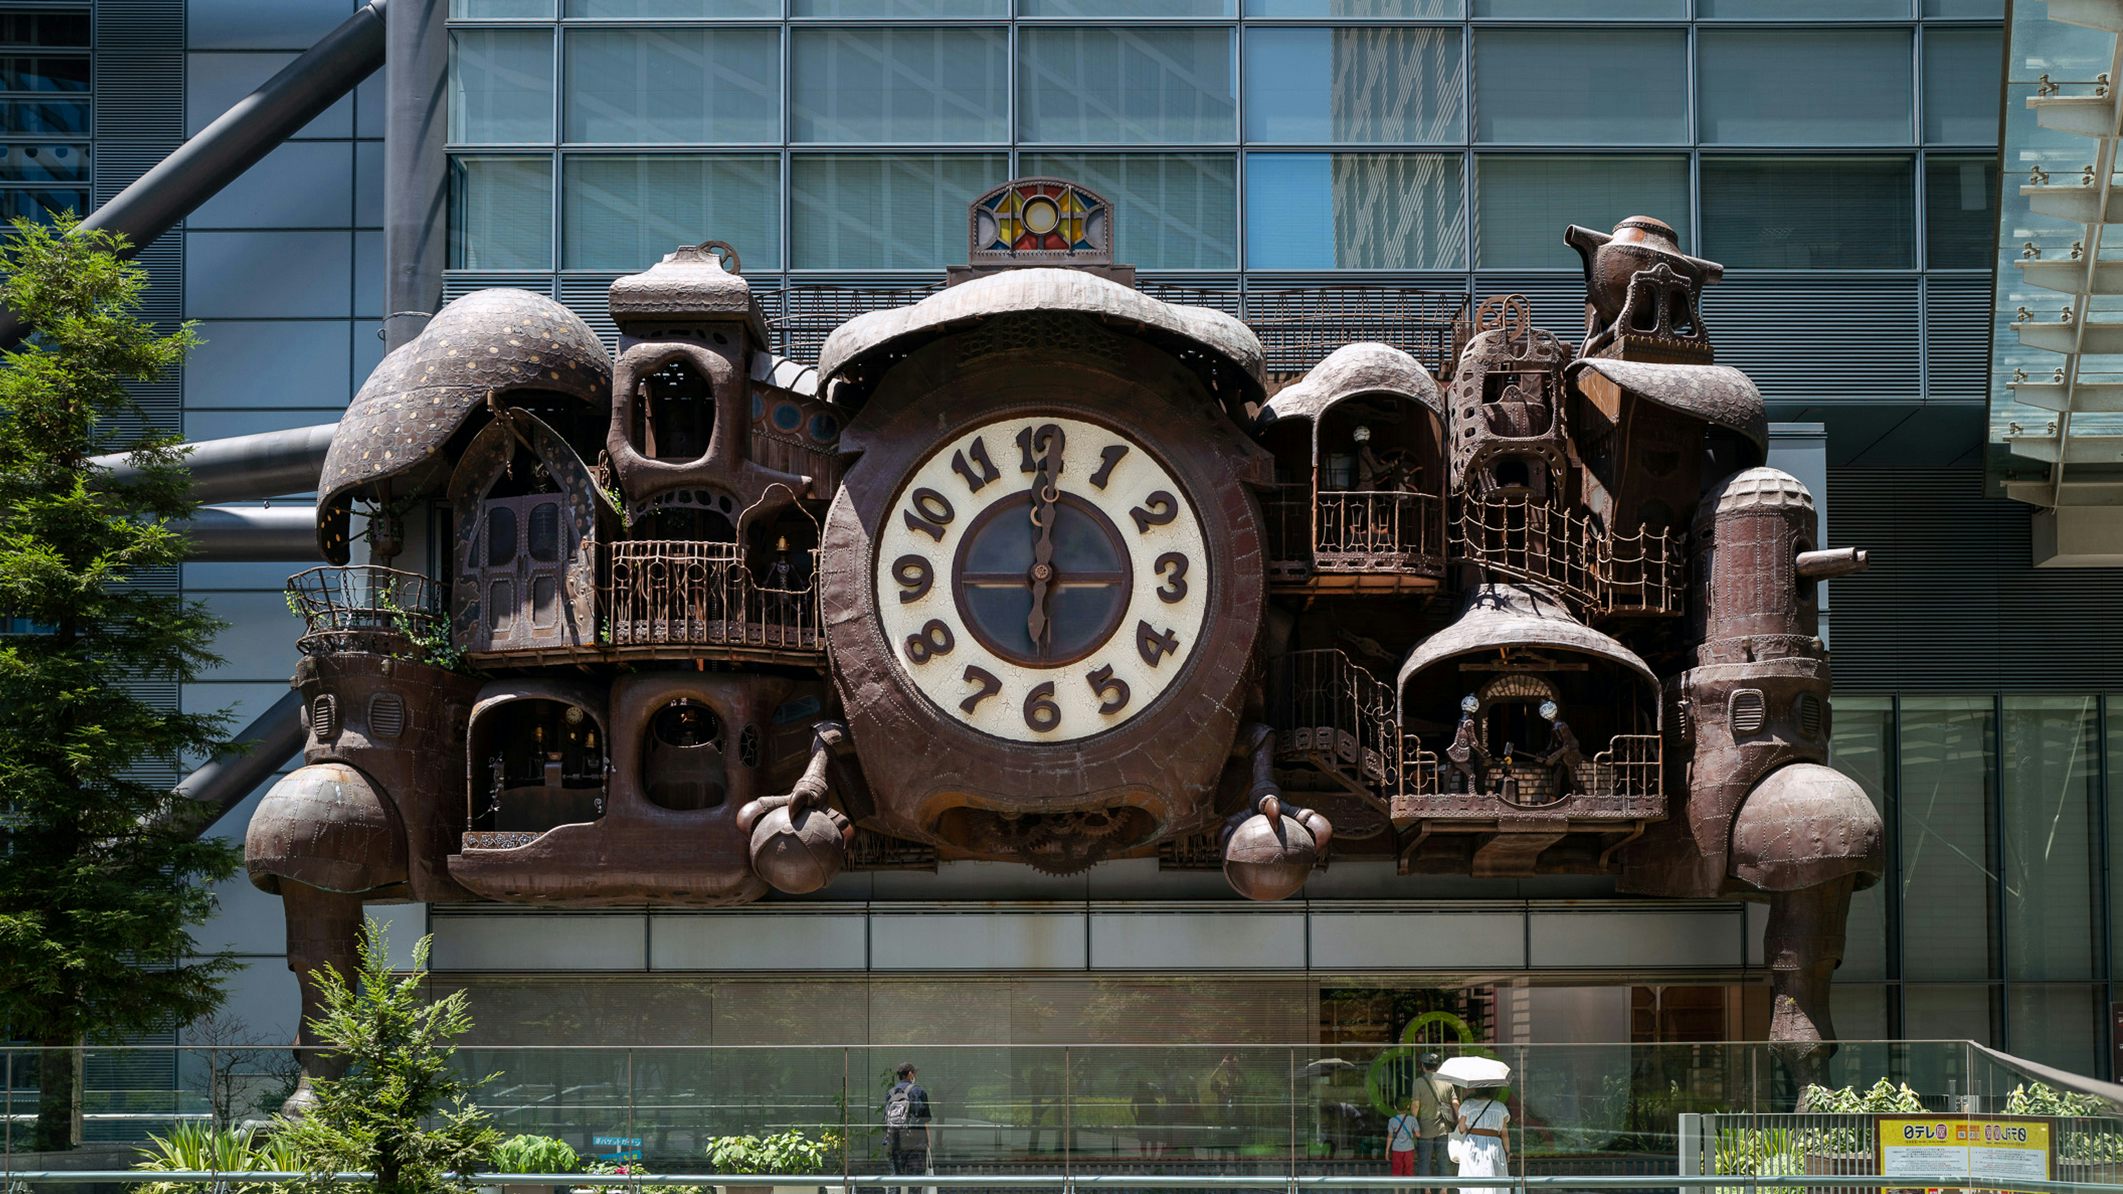 The Guide To Tokyo's Public Clocks